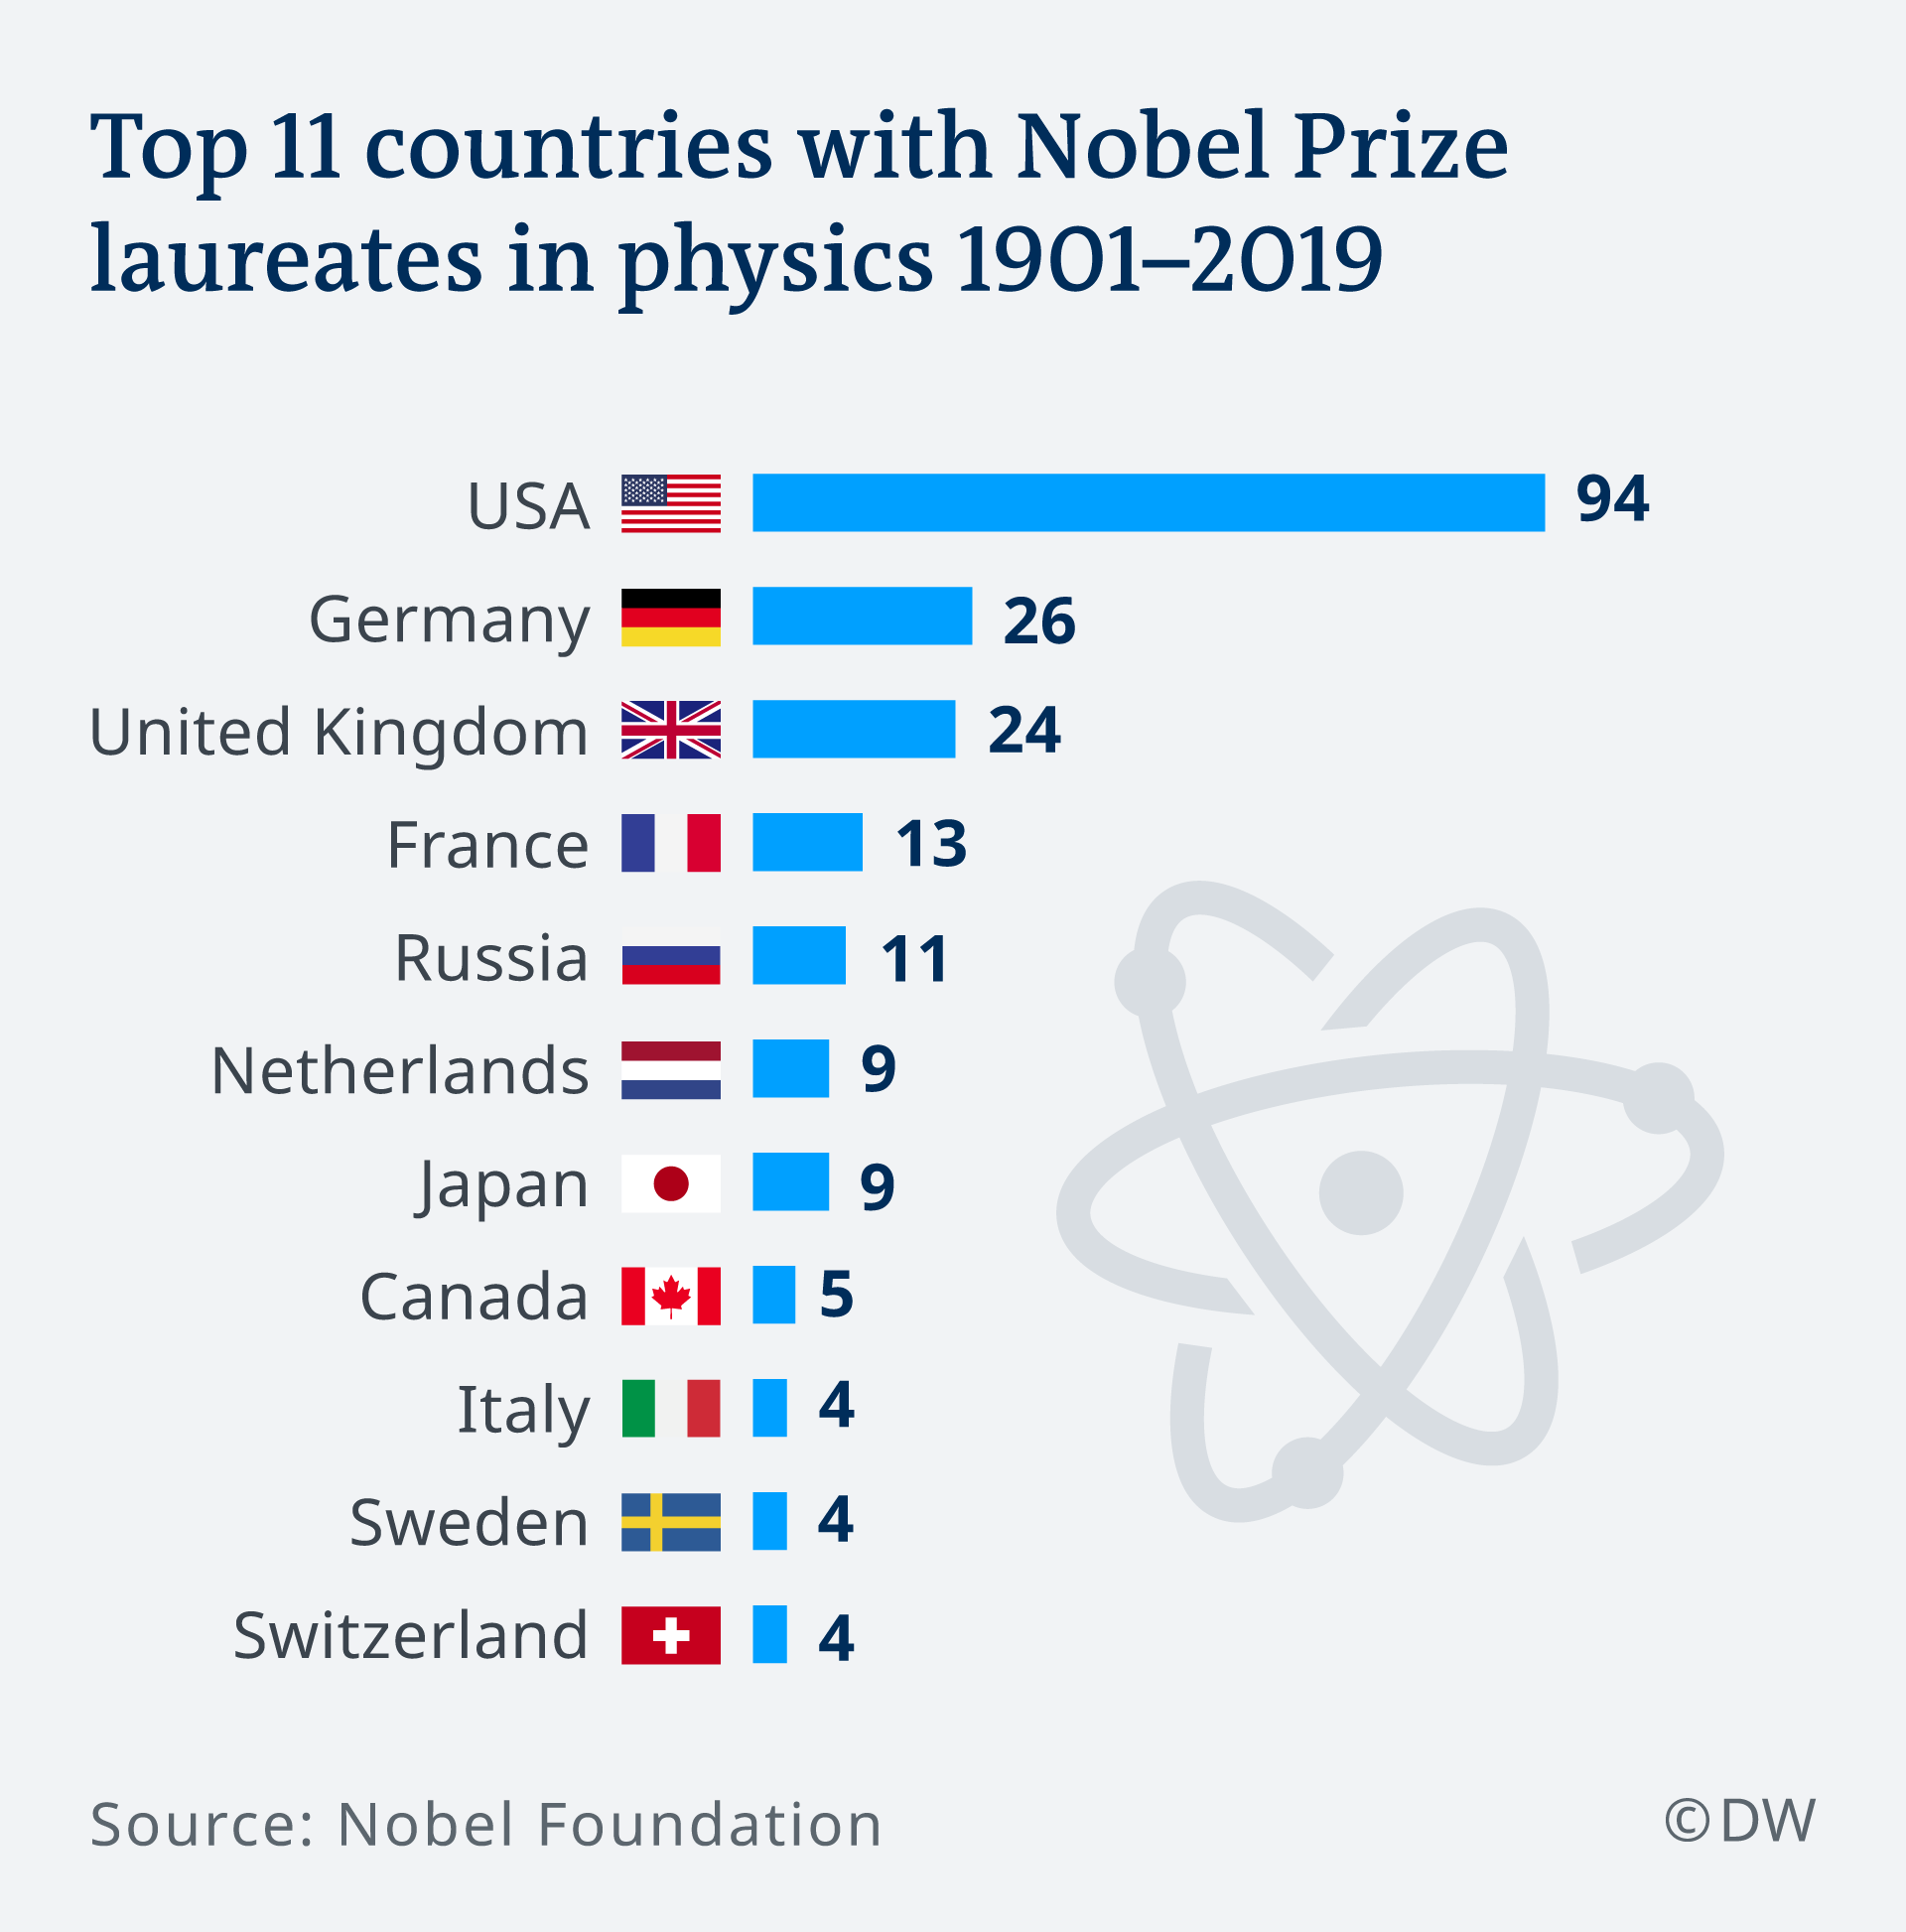 Infographic showing the top 11 countries with Nobel Prize laureates in Physics 1901-2019